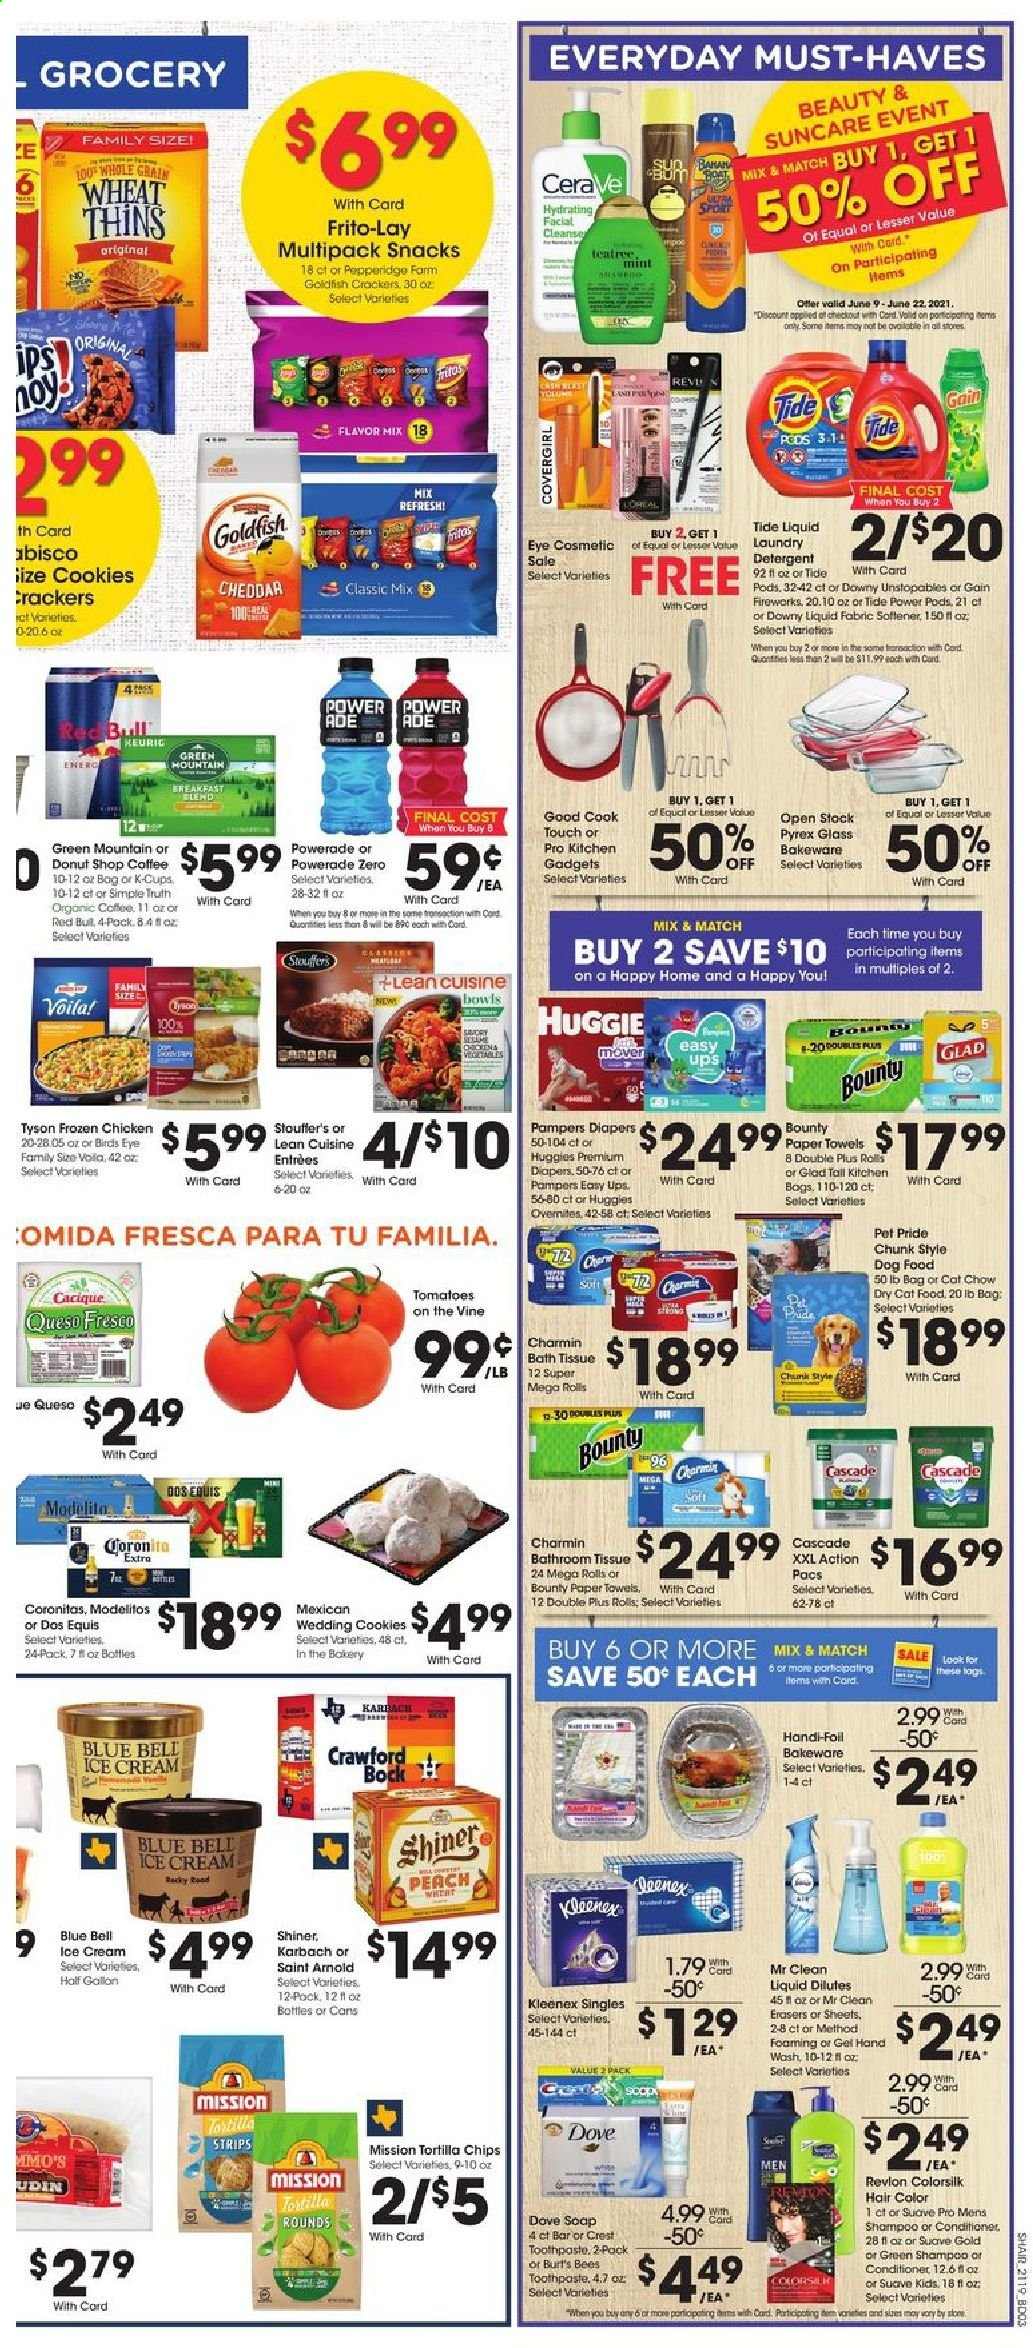 thumbnail - Kroger Flyer - 06/09/2021 - 06/15/2021 - Sales products - tomatoes, Bird's Eye, Lean Cuisine, queso fresco, ice cream, Blue Bell, strips, Stouffer's, cookies, snack, Bounty, crackers, tortilla chips, Thins, Goldfish, Frito-Lay, Powerade, organic coffee, coffee capsules, K-Cups, Keurig, Green Mountain, beer, Dos Equis, Huggies, Pampers, nappies, Dove, bath tissue, Kleenex, kitchen towels, paper towels, Charmin, detergent, Gain, Cascade, Tide, Unstopables, fabric softener, laundry detergent, Gain Fireworks, Downy Laundry, shampoo, Suave, hand wash, soap, toothpaste, Crest, CeraVe, conditioner, Revlon, hair color, gallon, bakeware, Pyrex, animal food, cat food, dog food, dry cat food. Page 6.